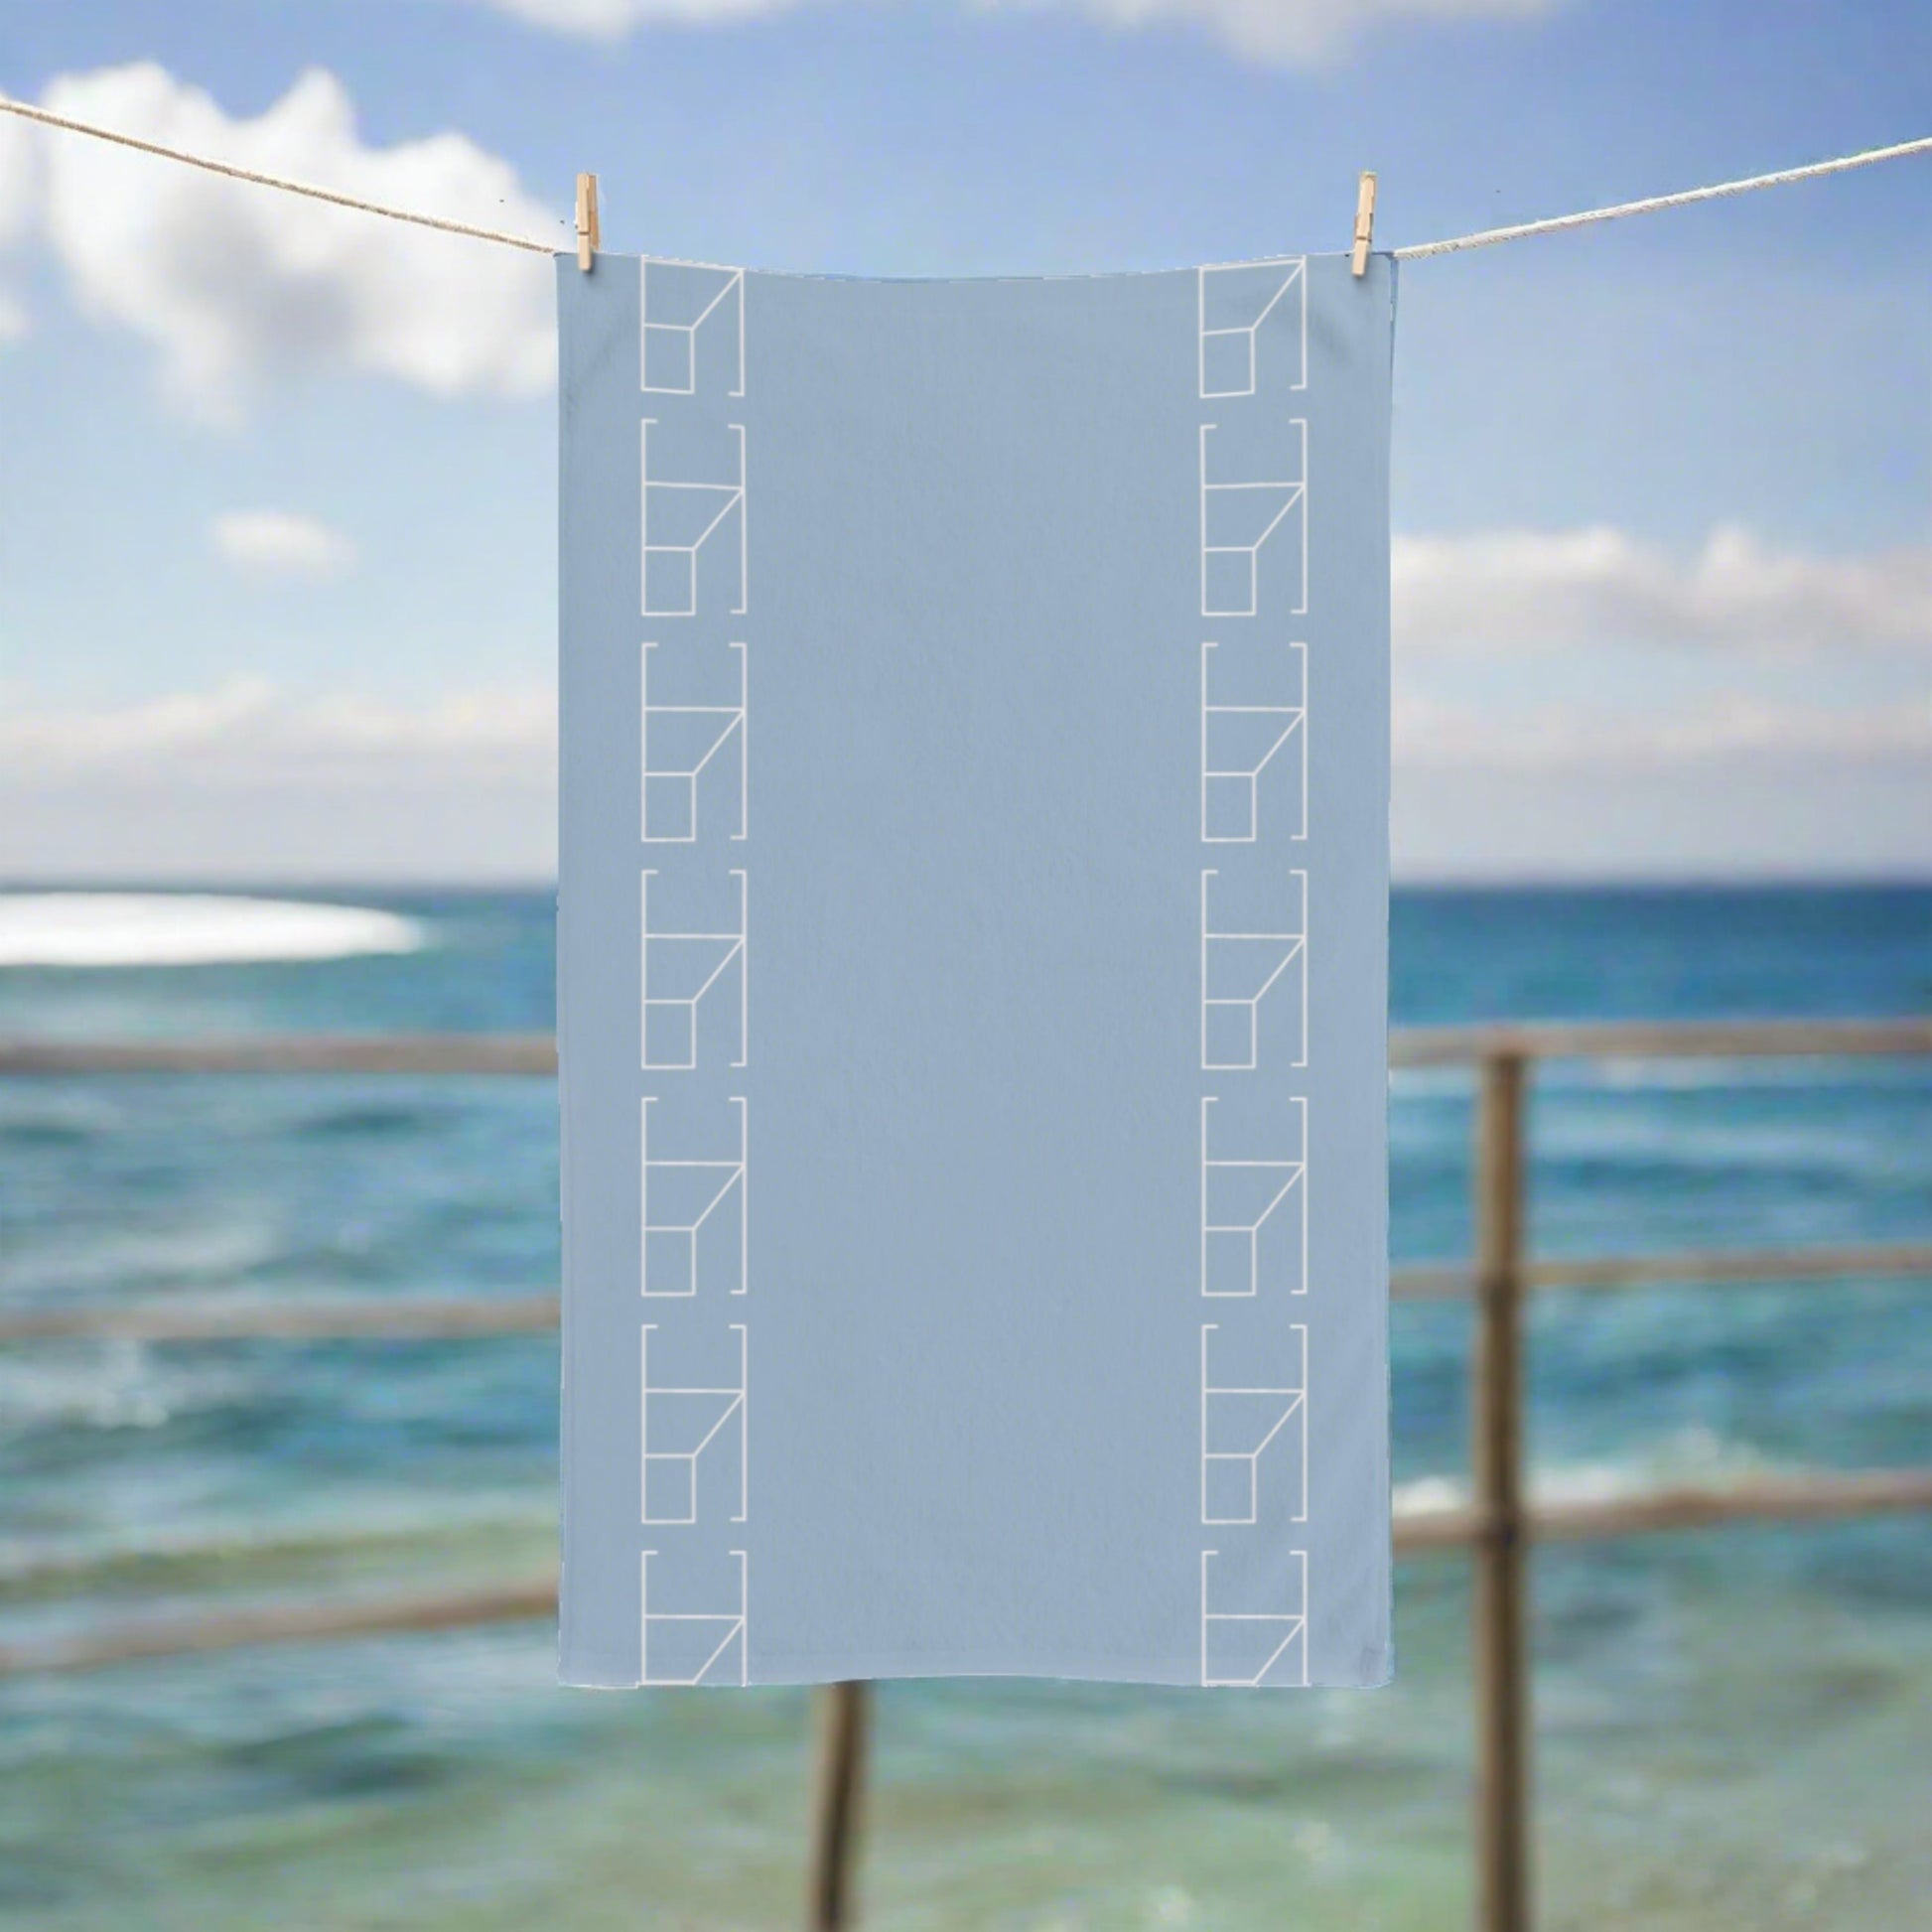 blue mist hand towel hanging from a rope outdoors, Imagine a relaxing beachside setting where the Blue Mist hand towel is hung by wooden clothespins on a rope strung between two weathered dock posts. The ocean's tranquil blues in the background mirror the towel's hue, and the gentle sea breeze animates the fabric, capturing the essence of a serene coastal retreat.